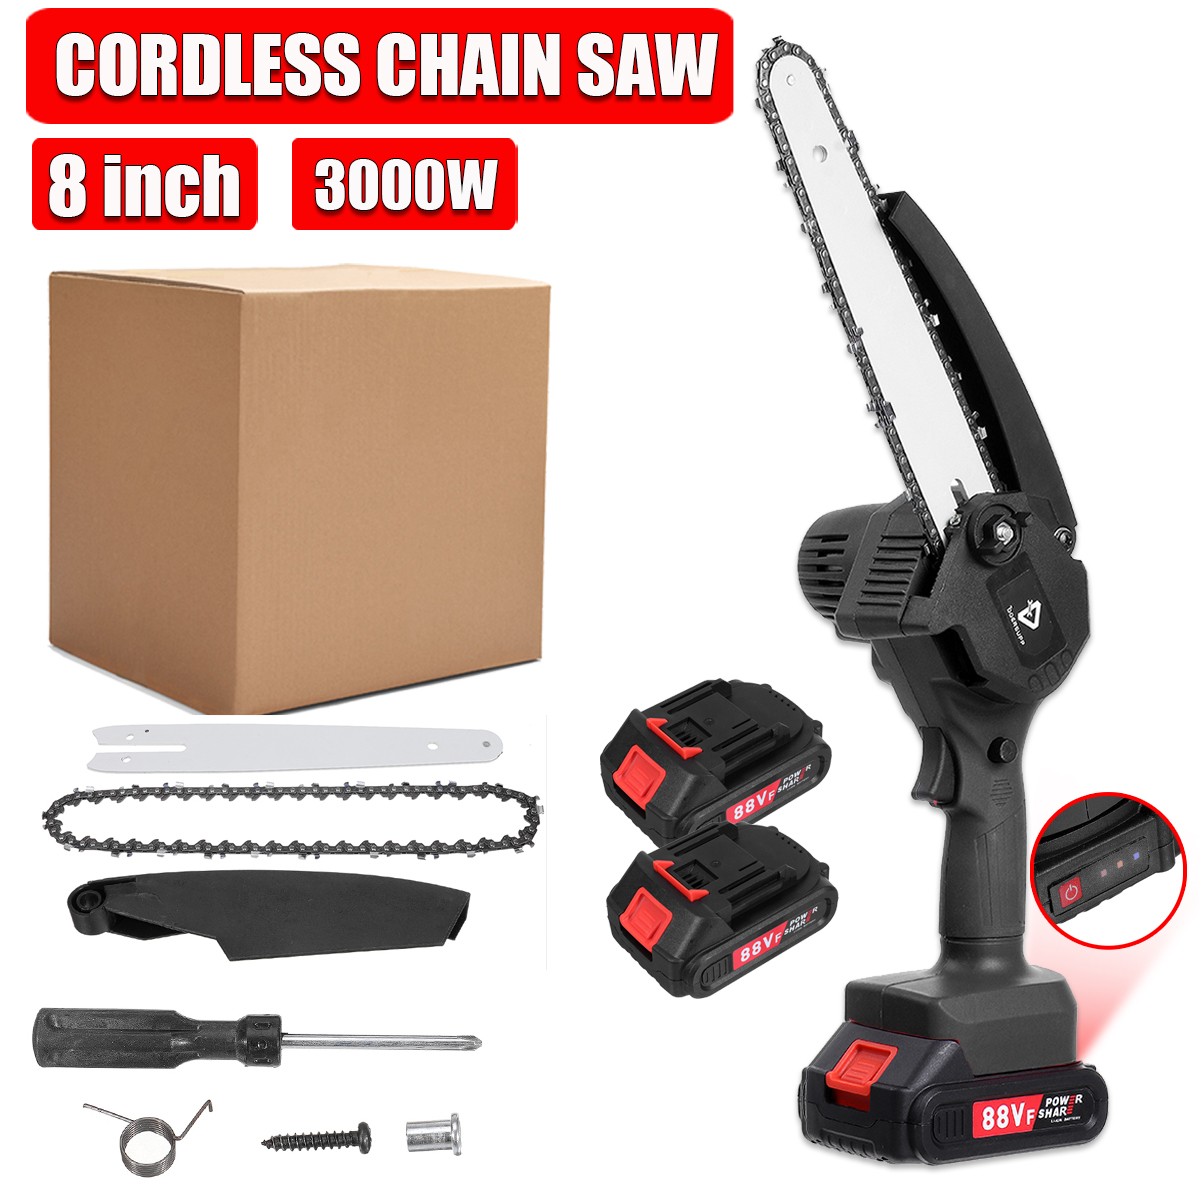 Doersupp-3000W-8-Inch-Portable-Bruless-Electric-Saw-Pruning-Chain-Saw-Rechargeable-Woodworking-Power-1915315-1